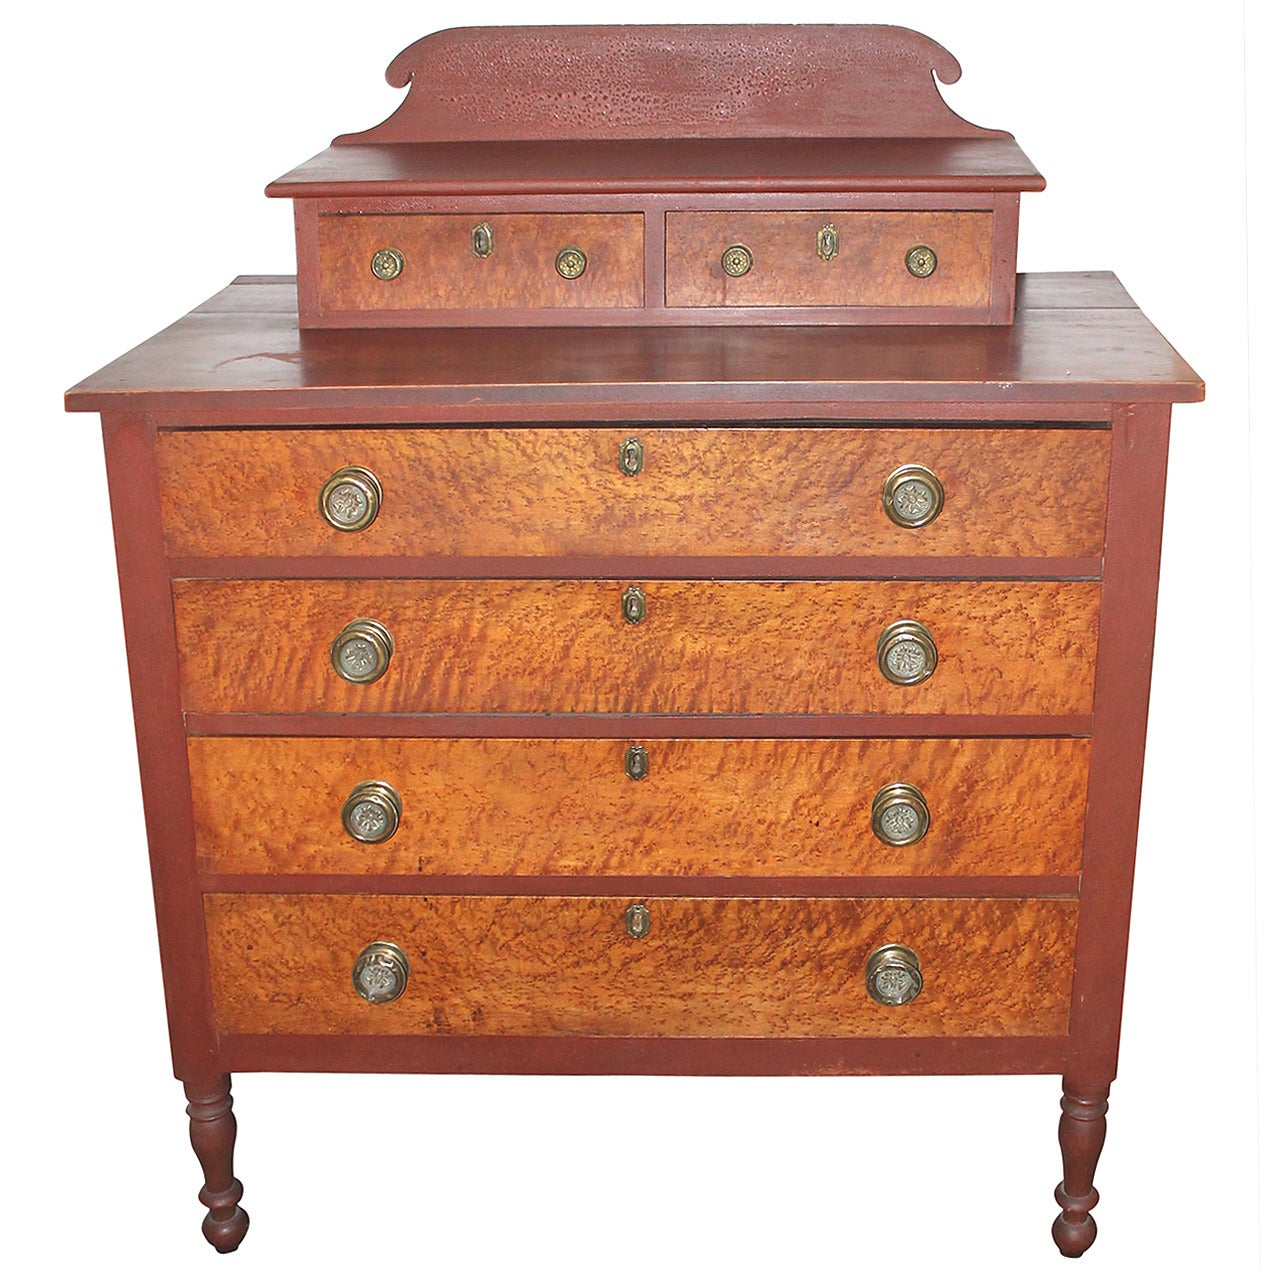 Early 19th Century Red Painted and Bird's-Eye Maple Chest of Drawers from Maine